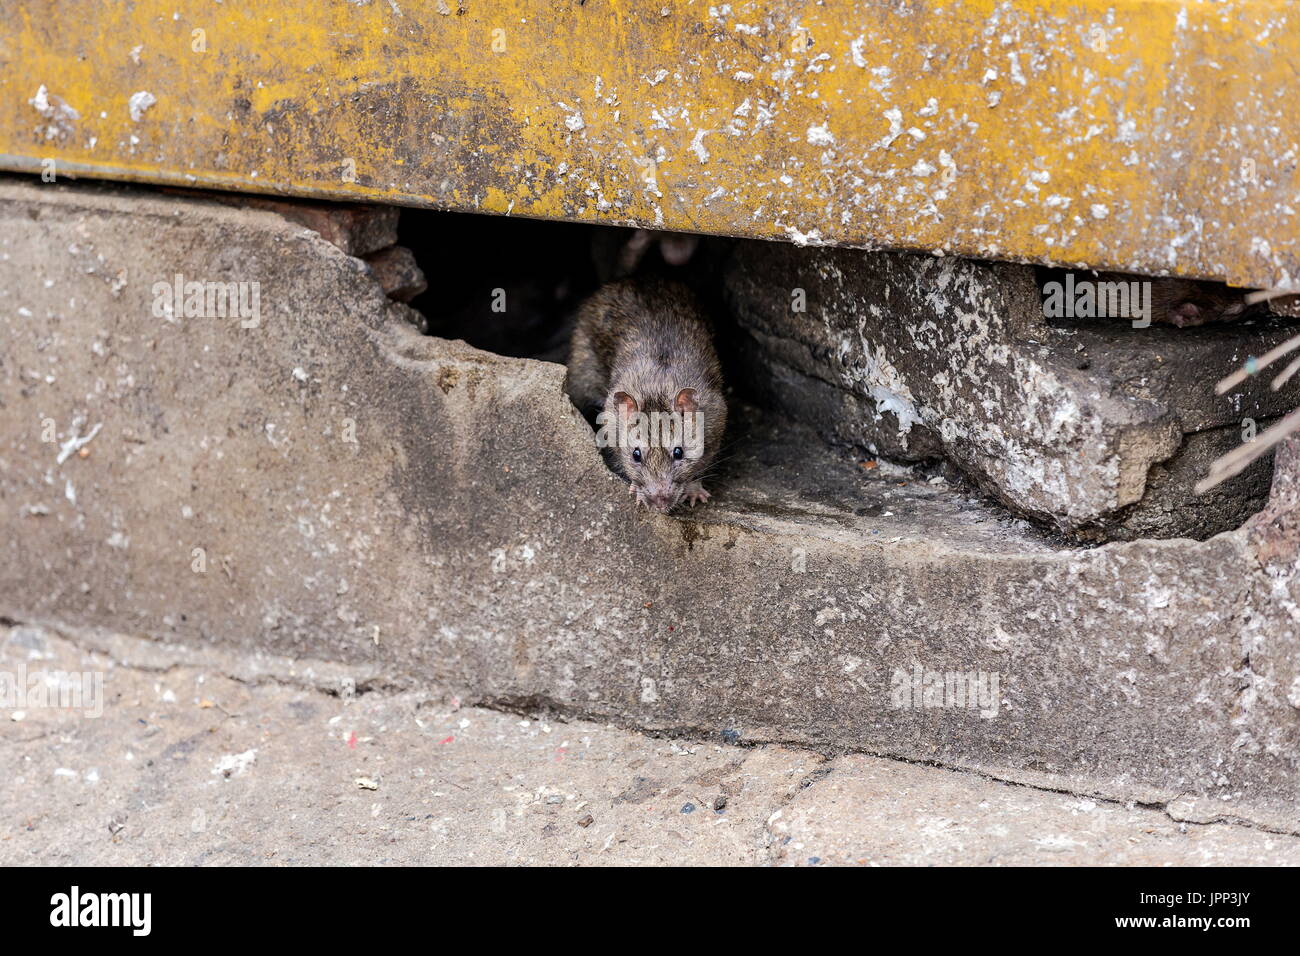 A rat come out from under the building. selective focus Stock Photo